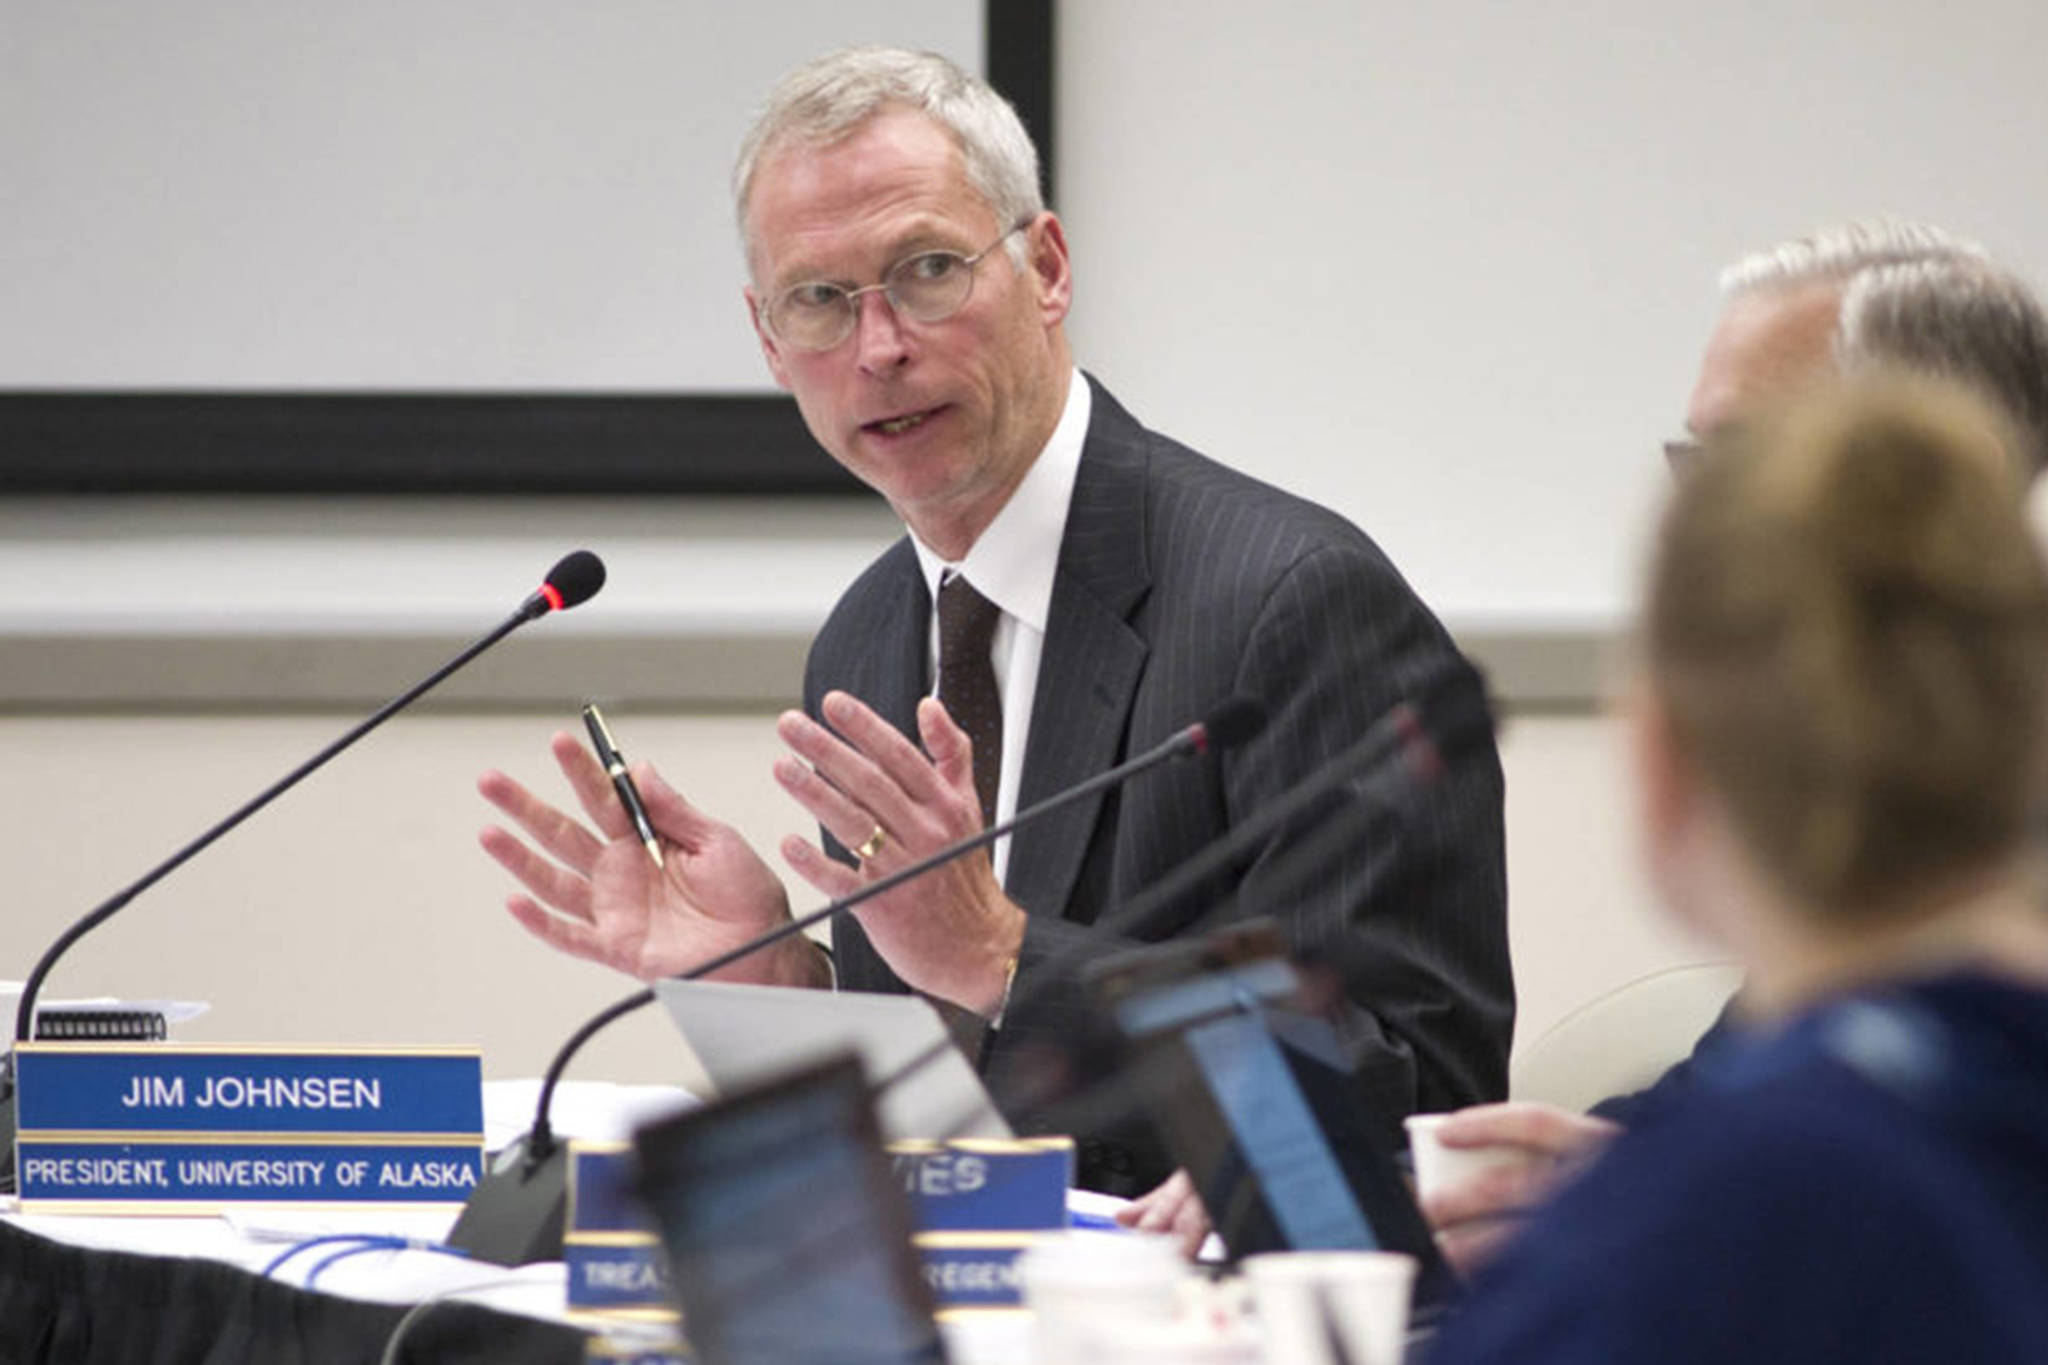 In this file photo from Sept. 15, 2016, University of Alaska President Jim Johnsen makes a presentation to the university’s Board of Regents at the University of Alaska Southeast Recreation Center. Johnsen and the UA board discussed tuition increases and budget concerns Friday. (Michael Penn | Juneau Empire File)